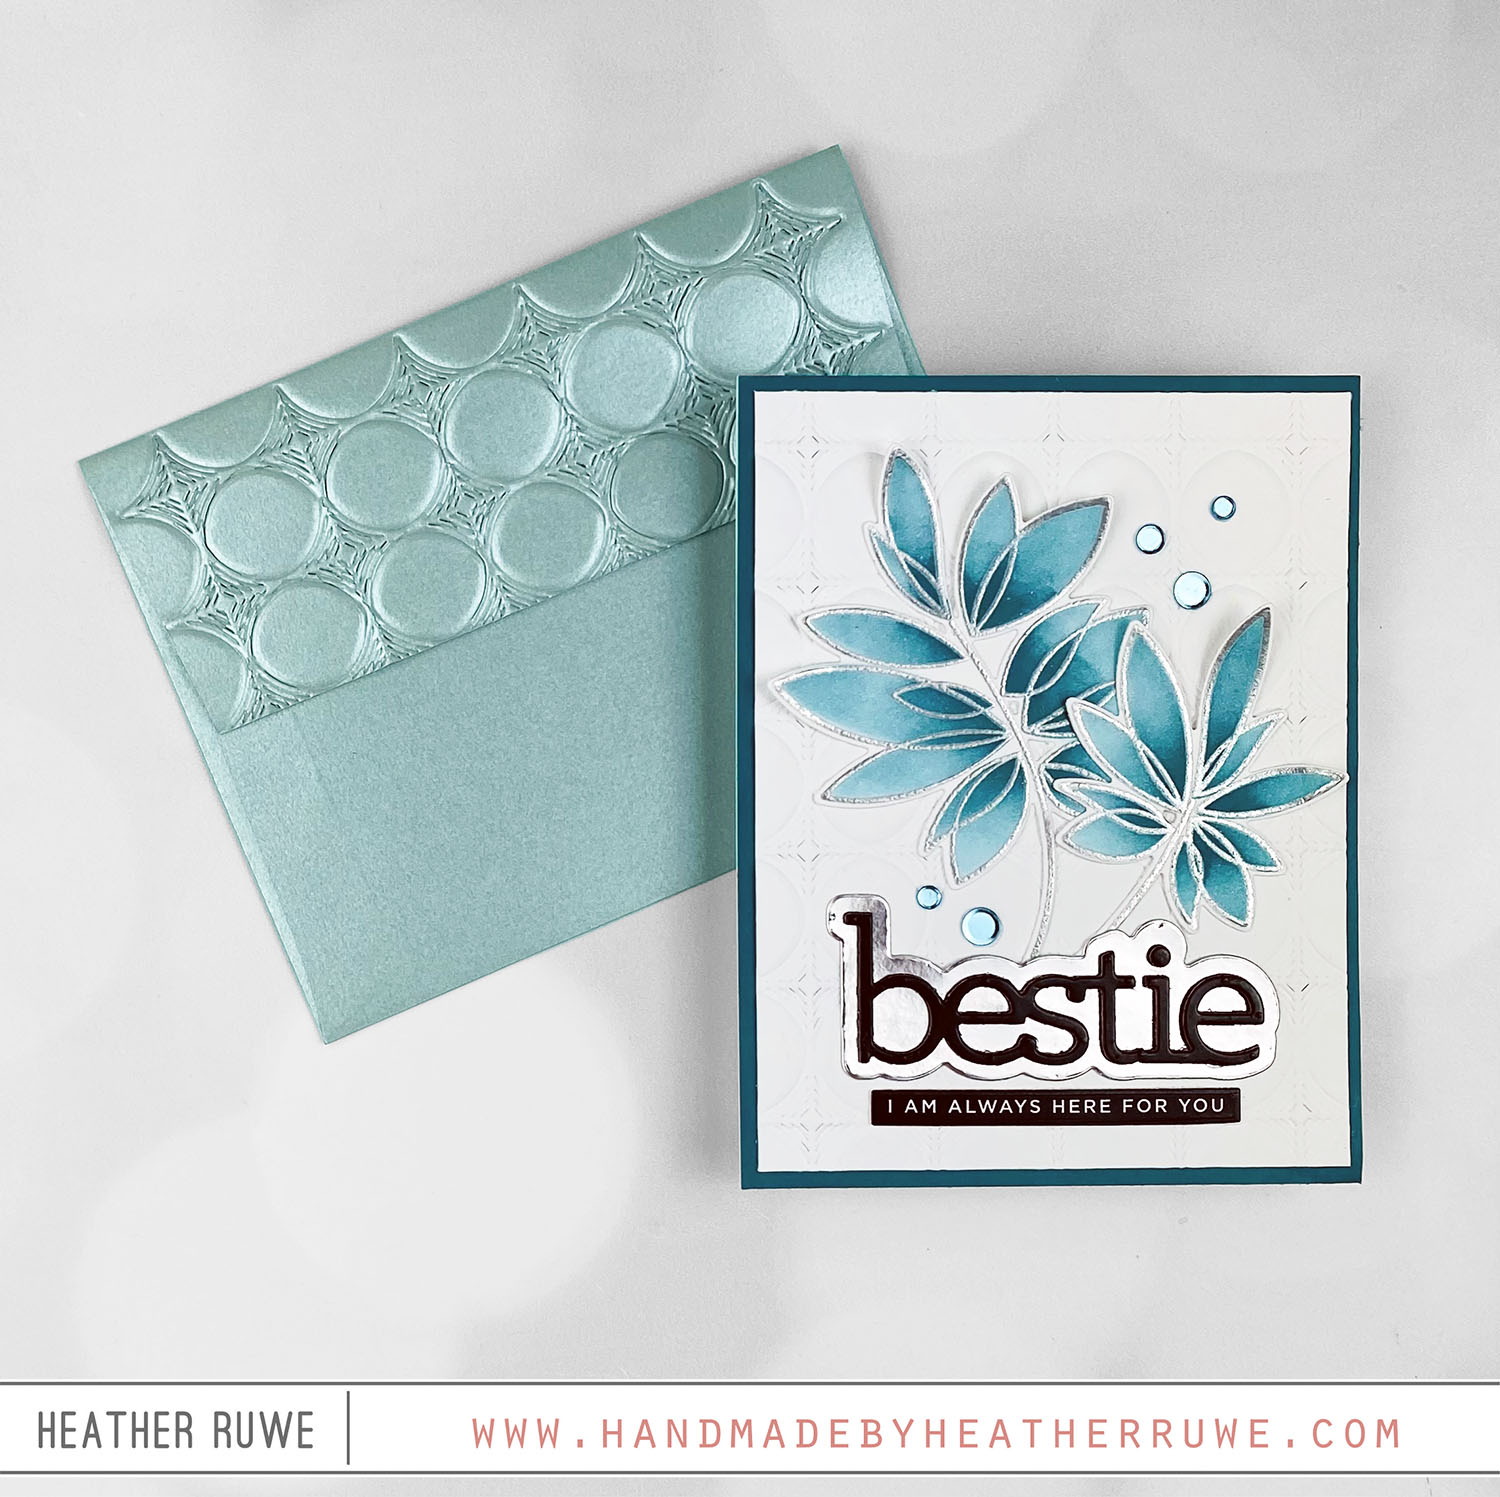 Hot Foiling on White Glossy Cardstock - Handmade by Heather Ruwe